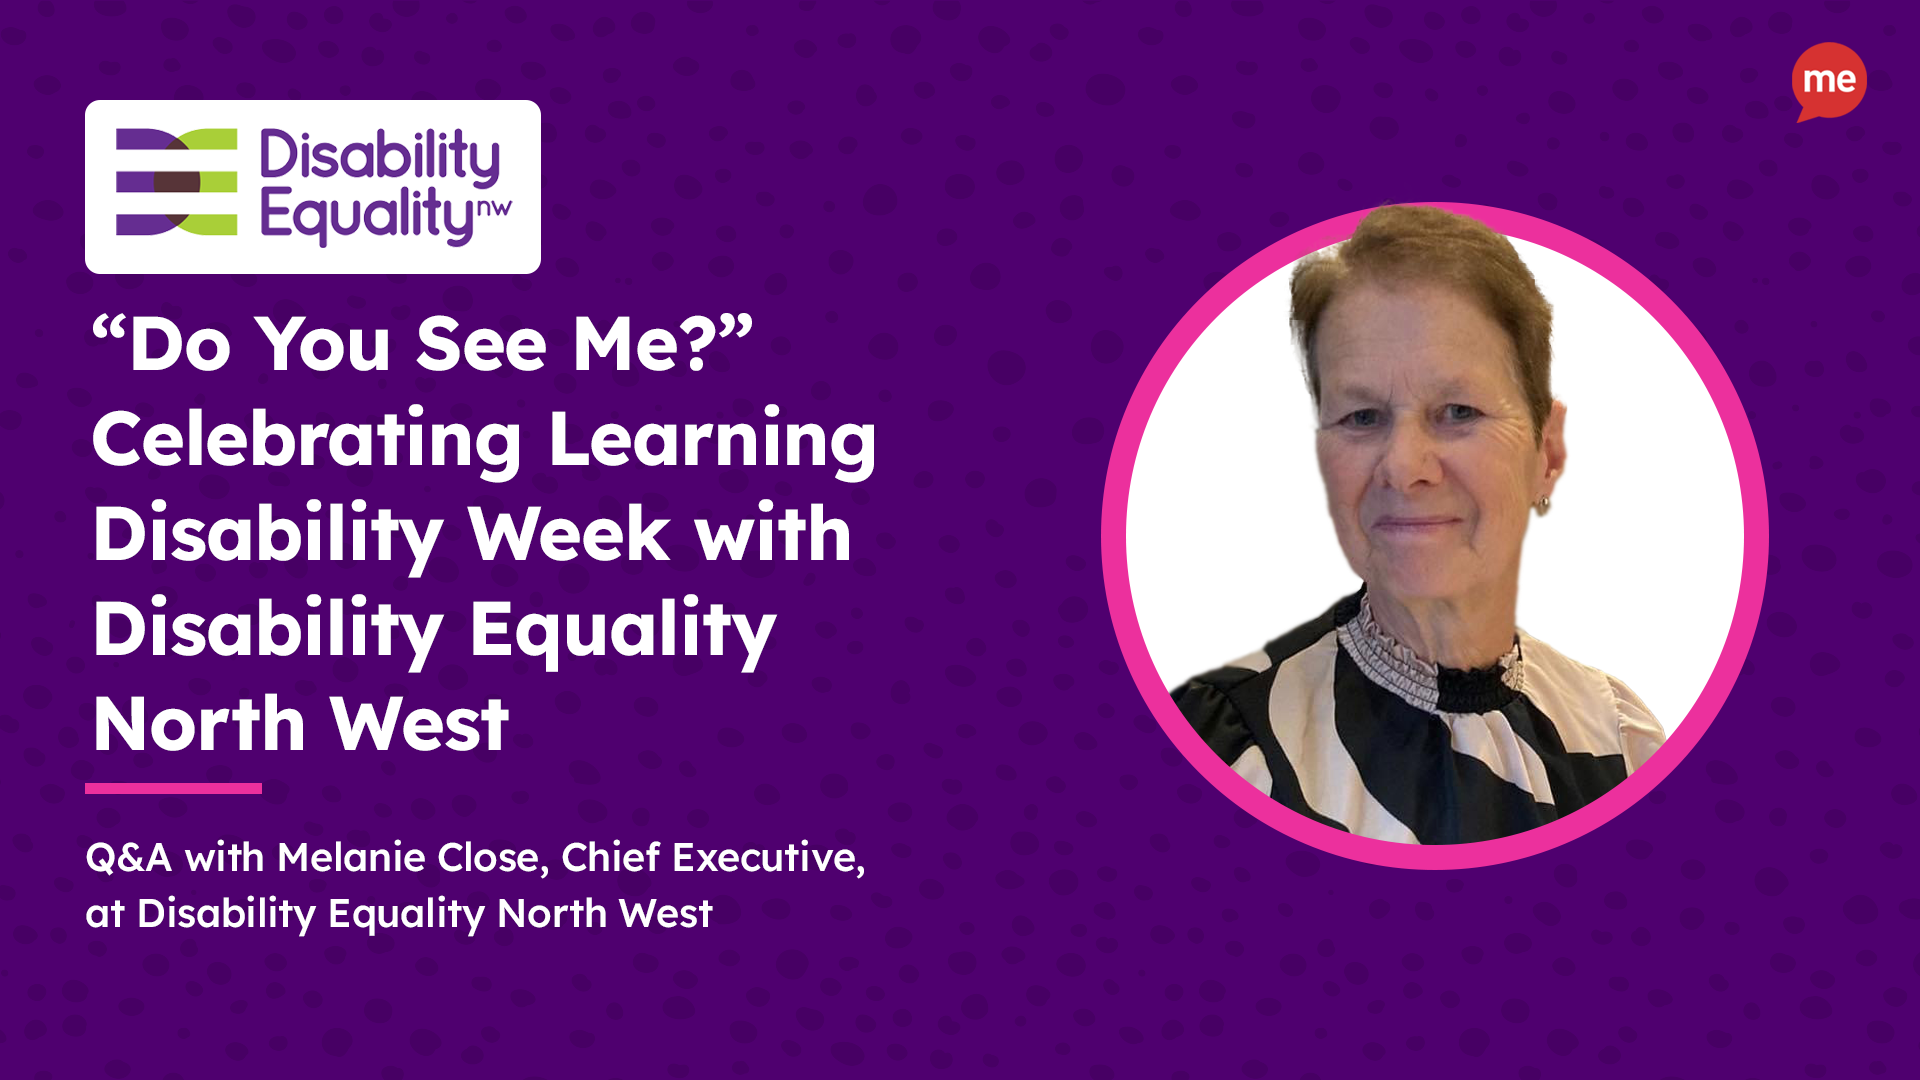 "Do You See Me?" Celebrating Learning Disability Week with Disability Equality North West